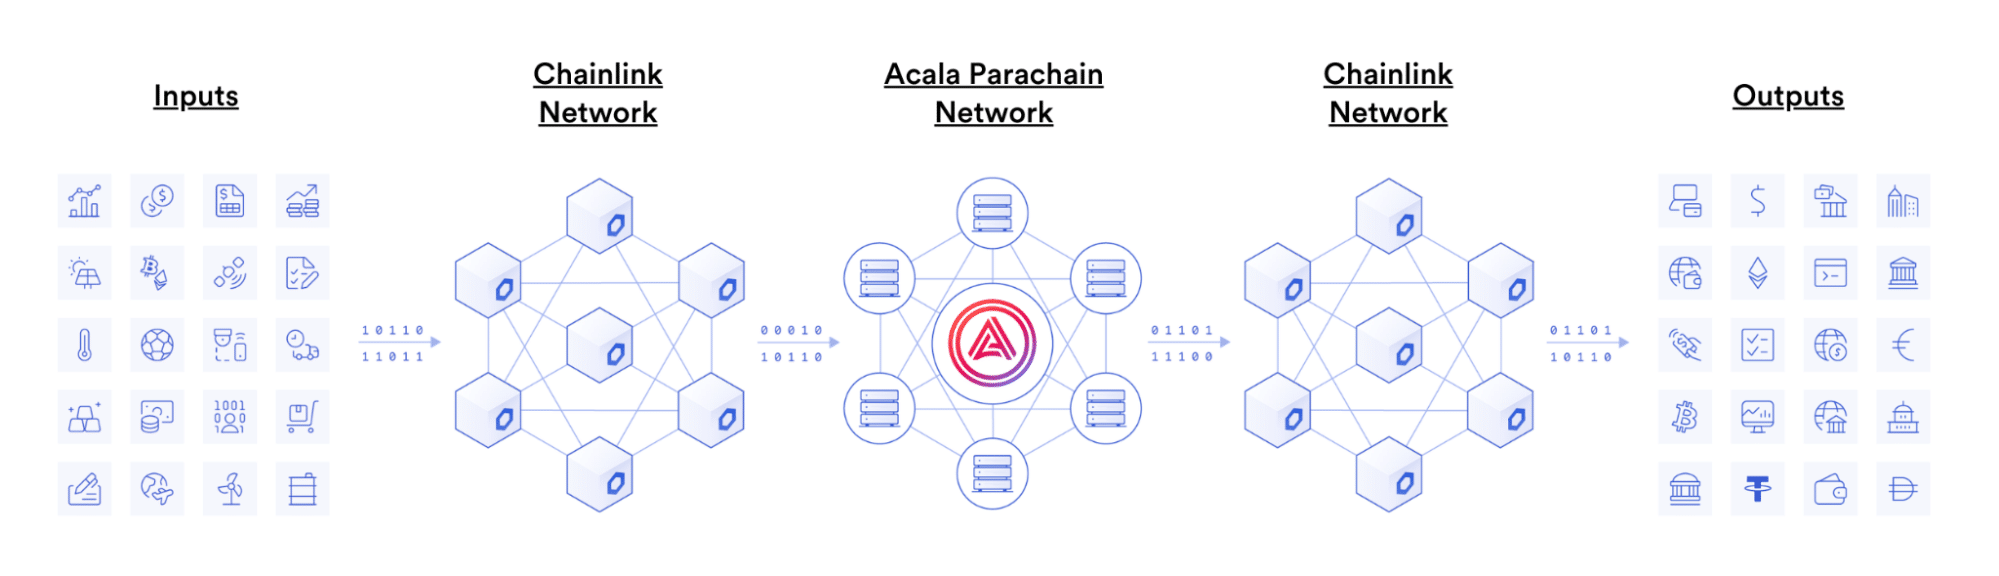 Acala Integrating Chainlink Oracle Pallet for Price Feeds Upon Upcoming Polkadot Launch